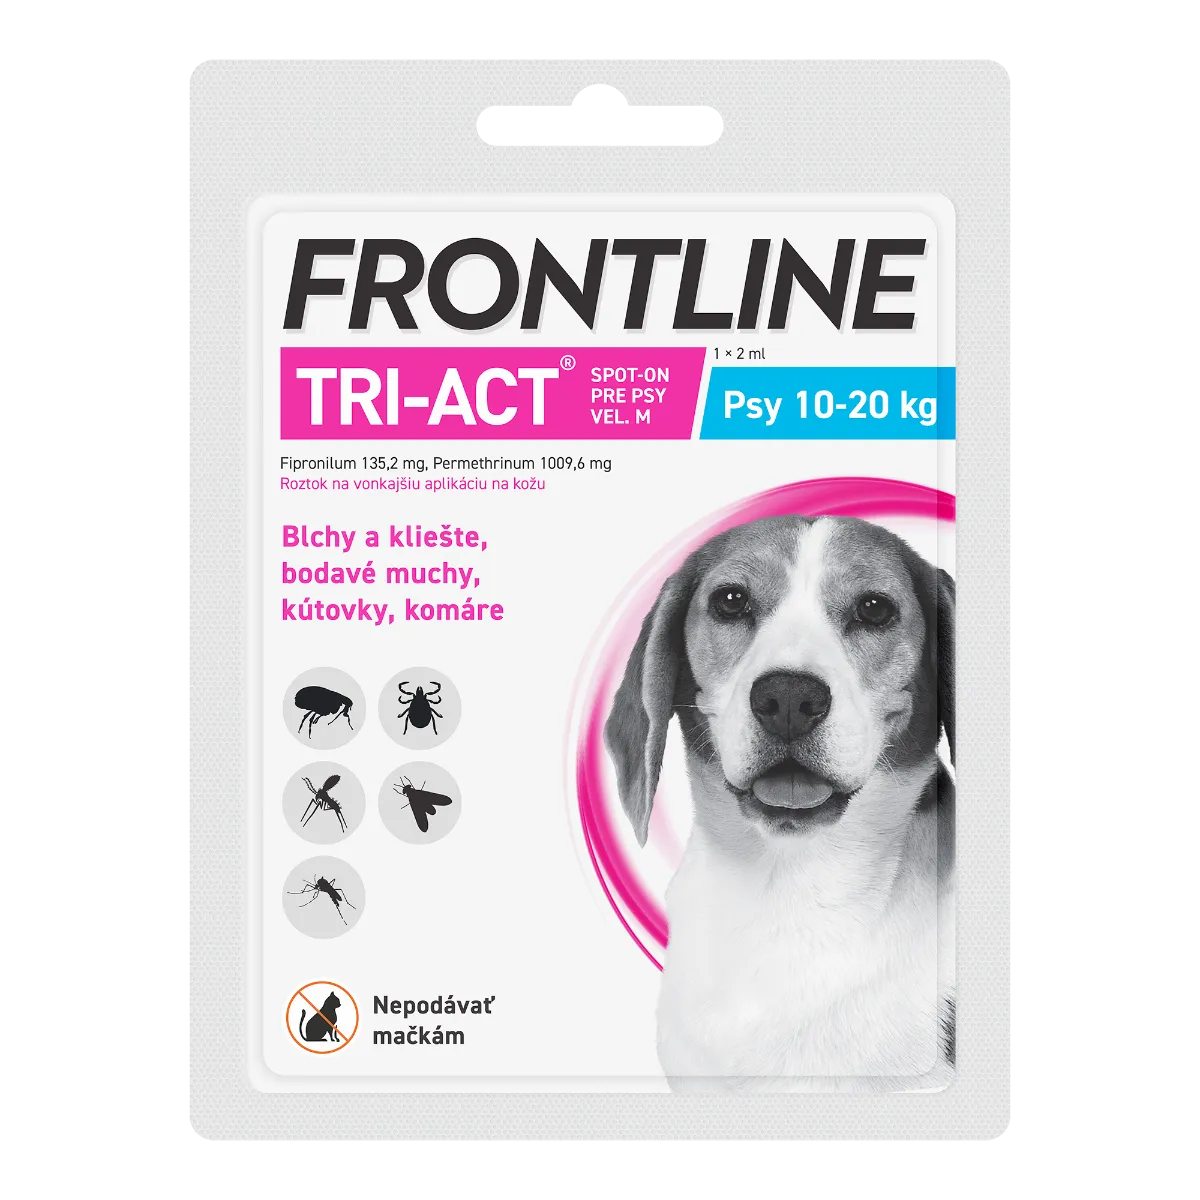 FRONTLINE TRI-ACT Spot-on 